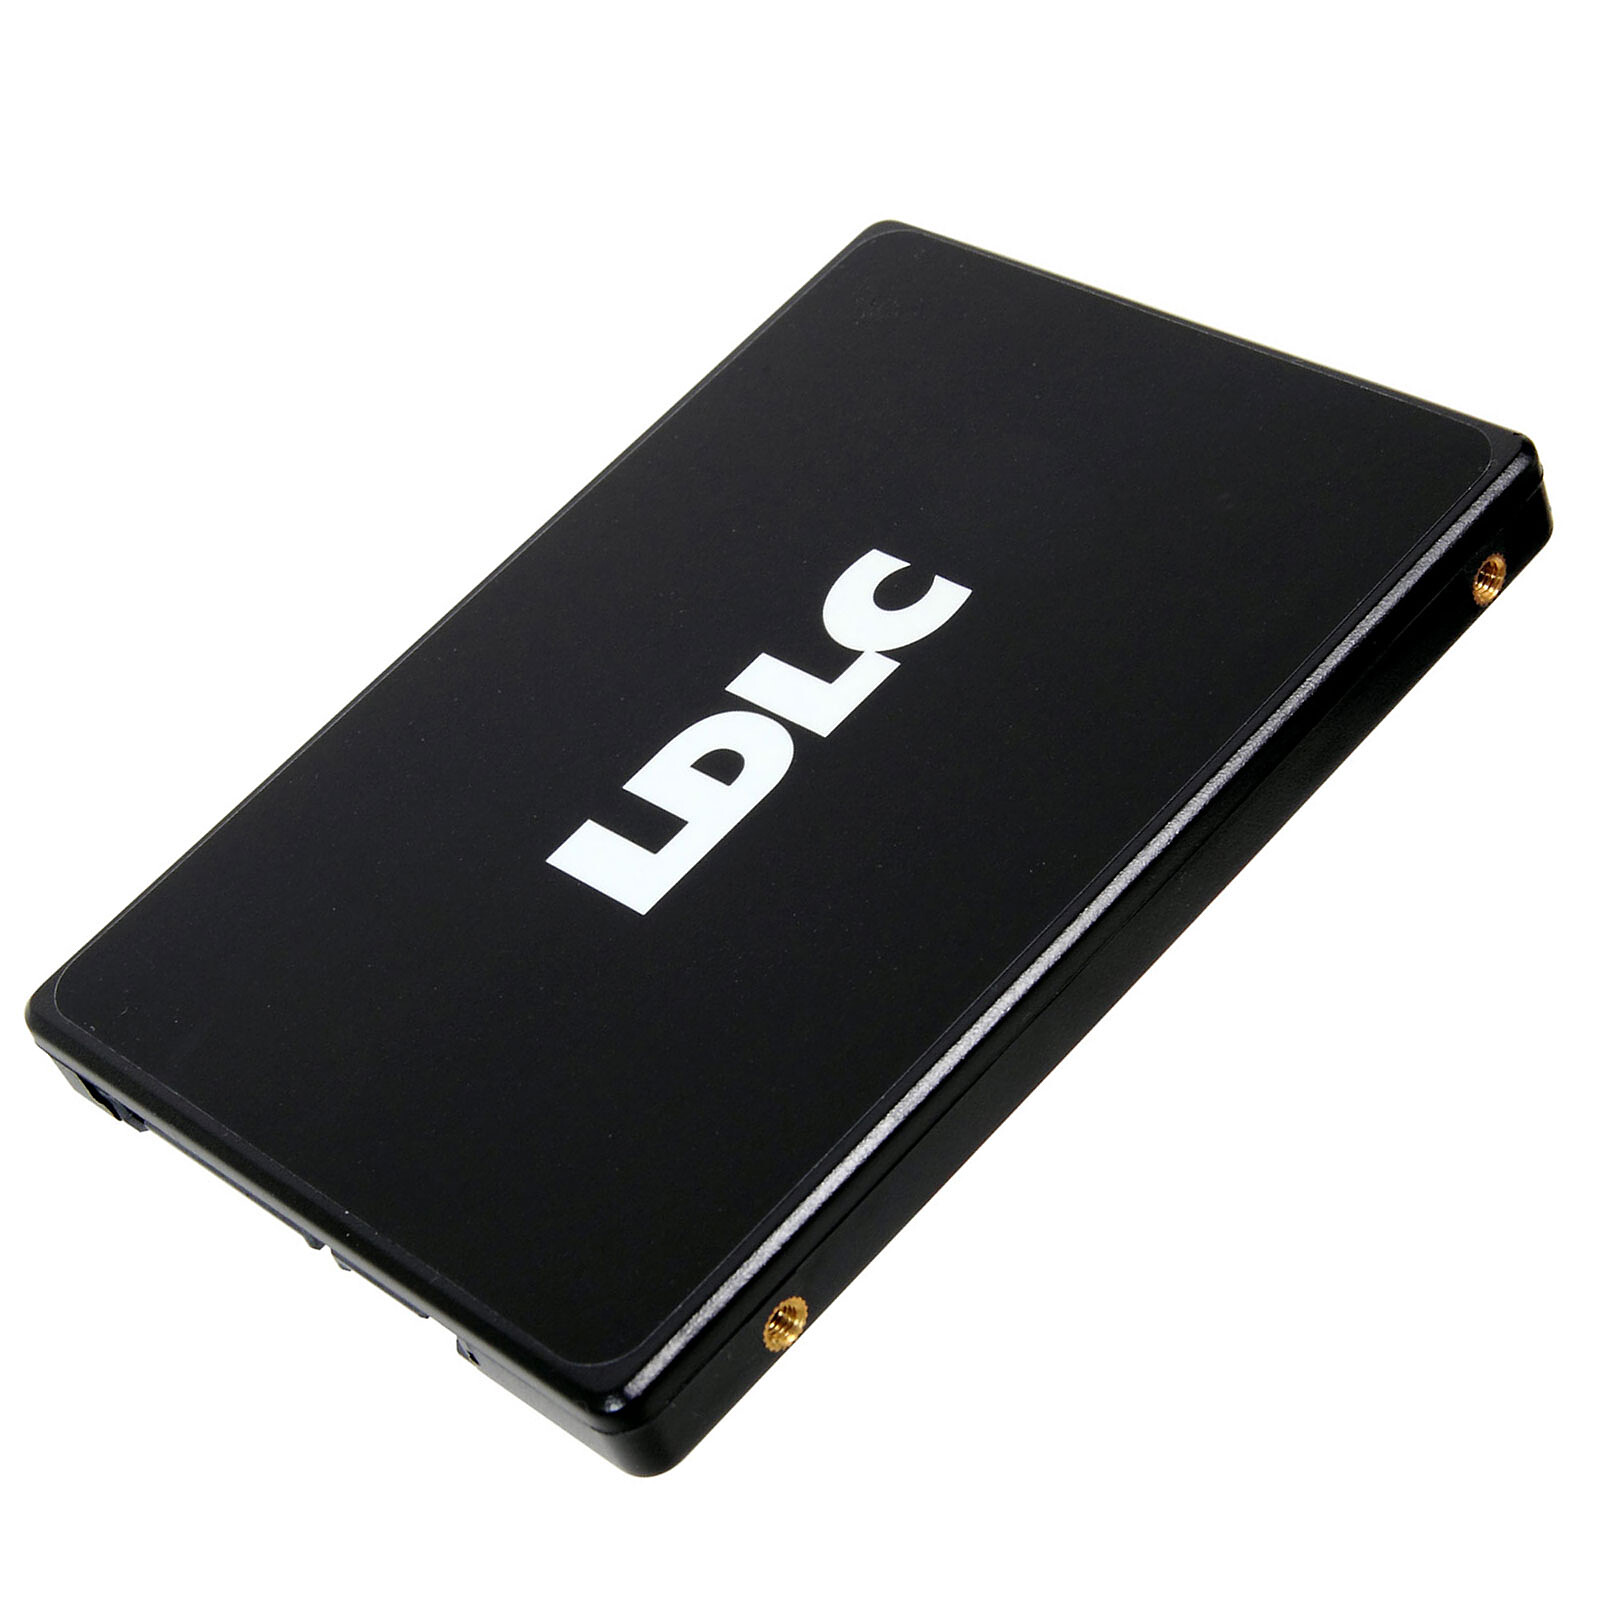 Kingston SSD NV2 4 To - Disque SSD - LDLC